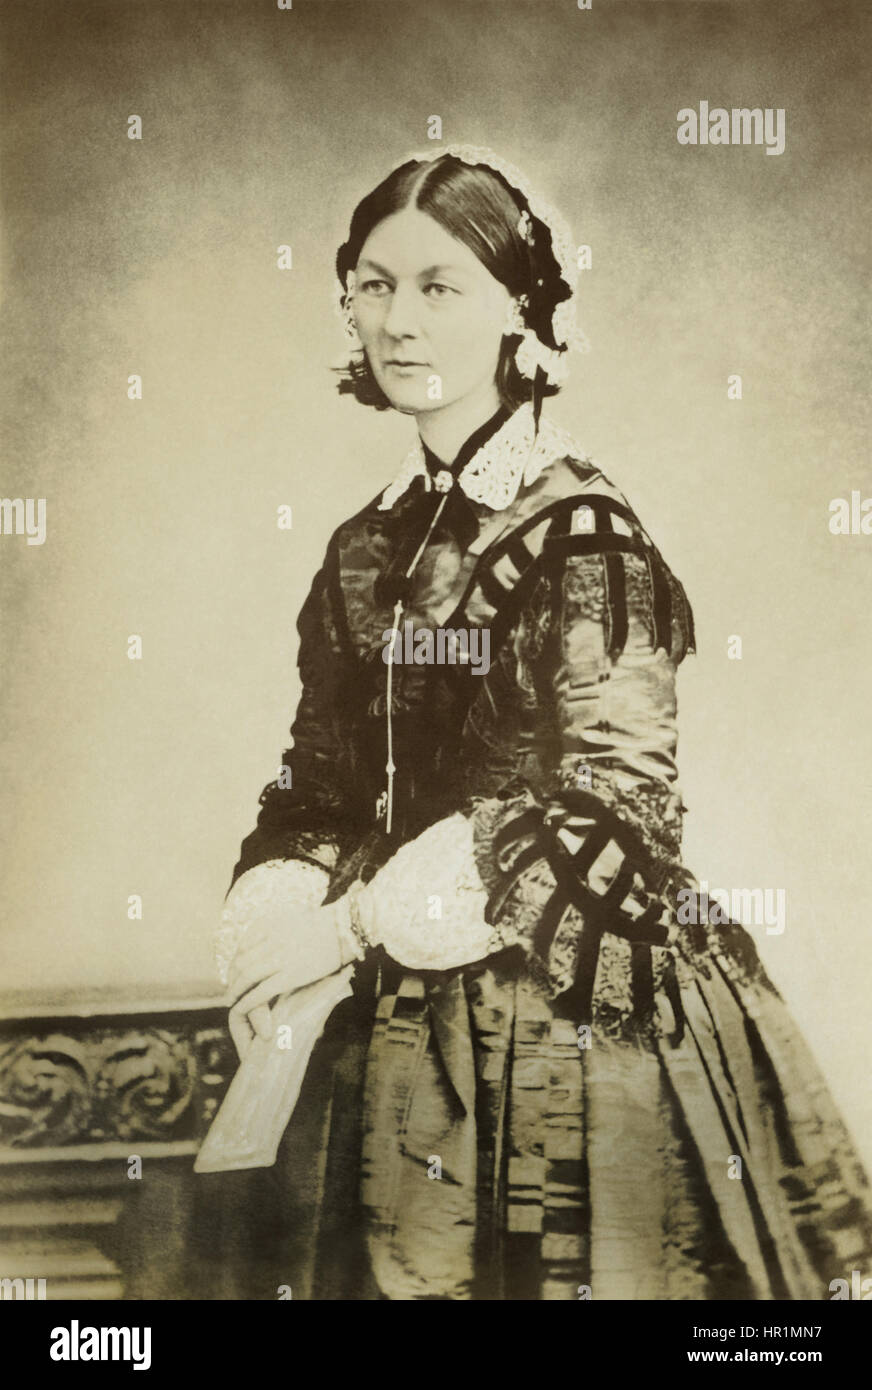 Florence Nightingale (1820-1910), the founder of modern nursing, in a c1856 photograph by William Edward Kilburn. Nightingale led a team of nurses she trained to tend to the wounded British and allied forces in the Crimean War (1854) at the Barrack Hospital in Scutari, a suburb of Constantinople. In 1860, she laid the foundation of professional nursing with the establishment of her nursing school at St Thomas' Hospital in London. Stock Photo